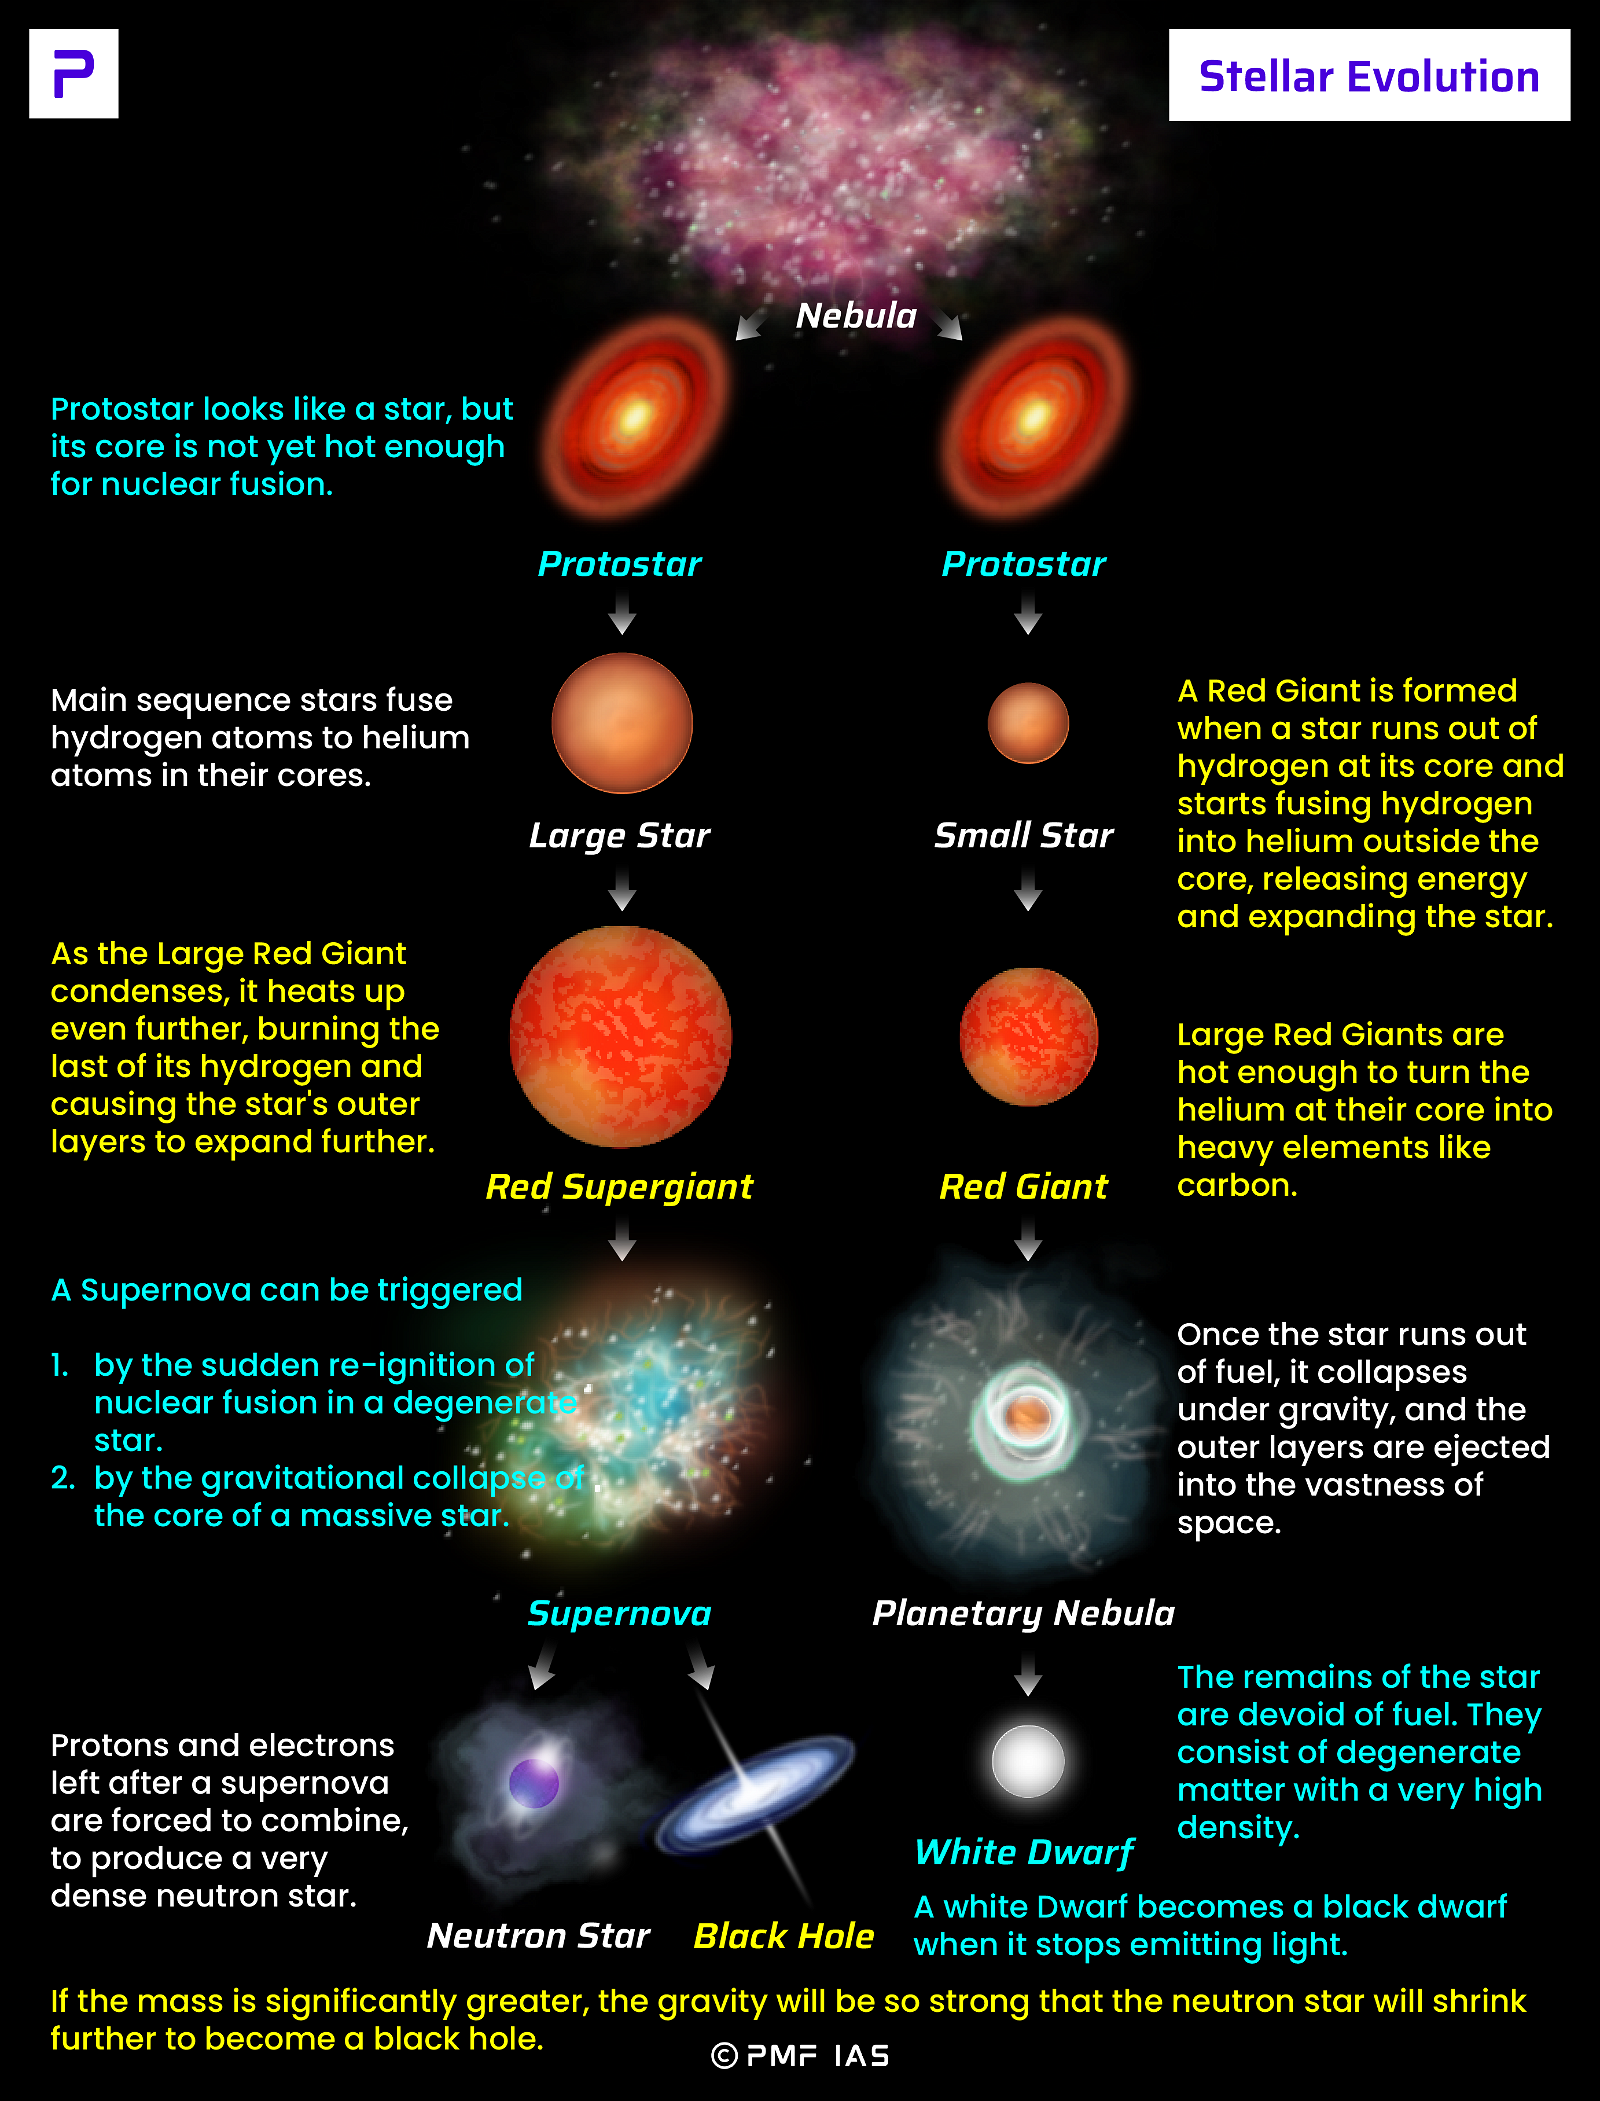 Star Formation Stellar Evolution or Life Cycle of A Star (PMF IAS)